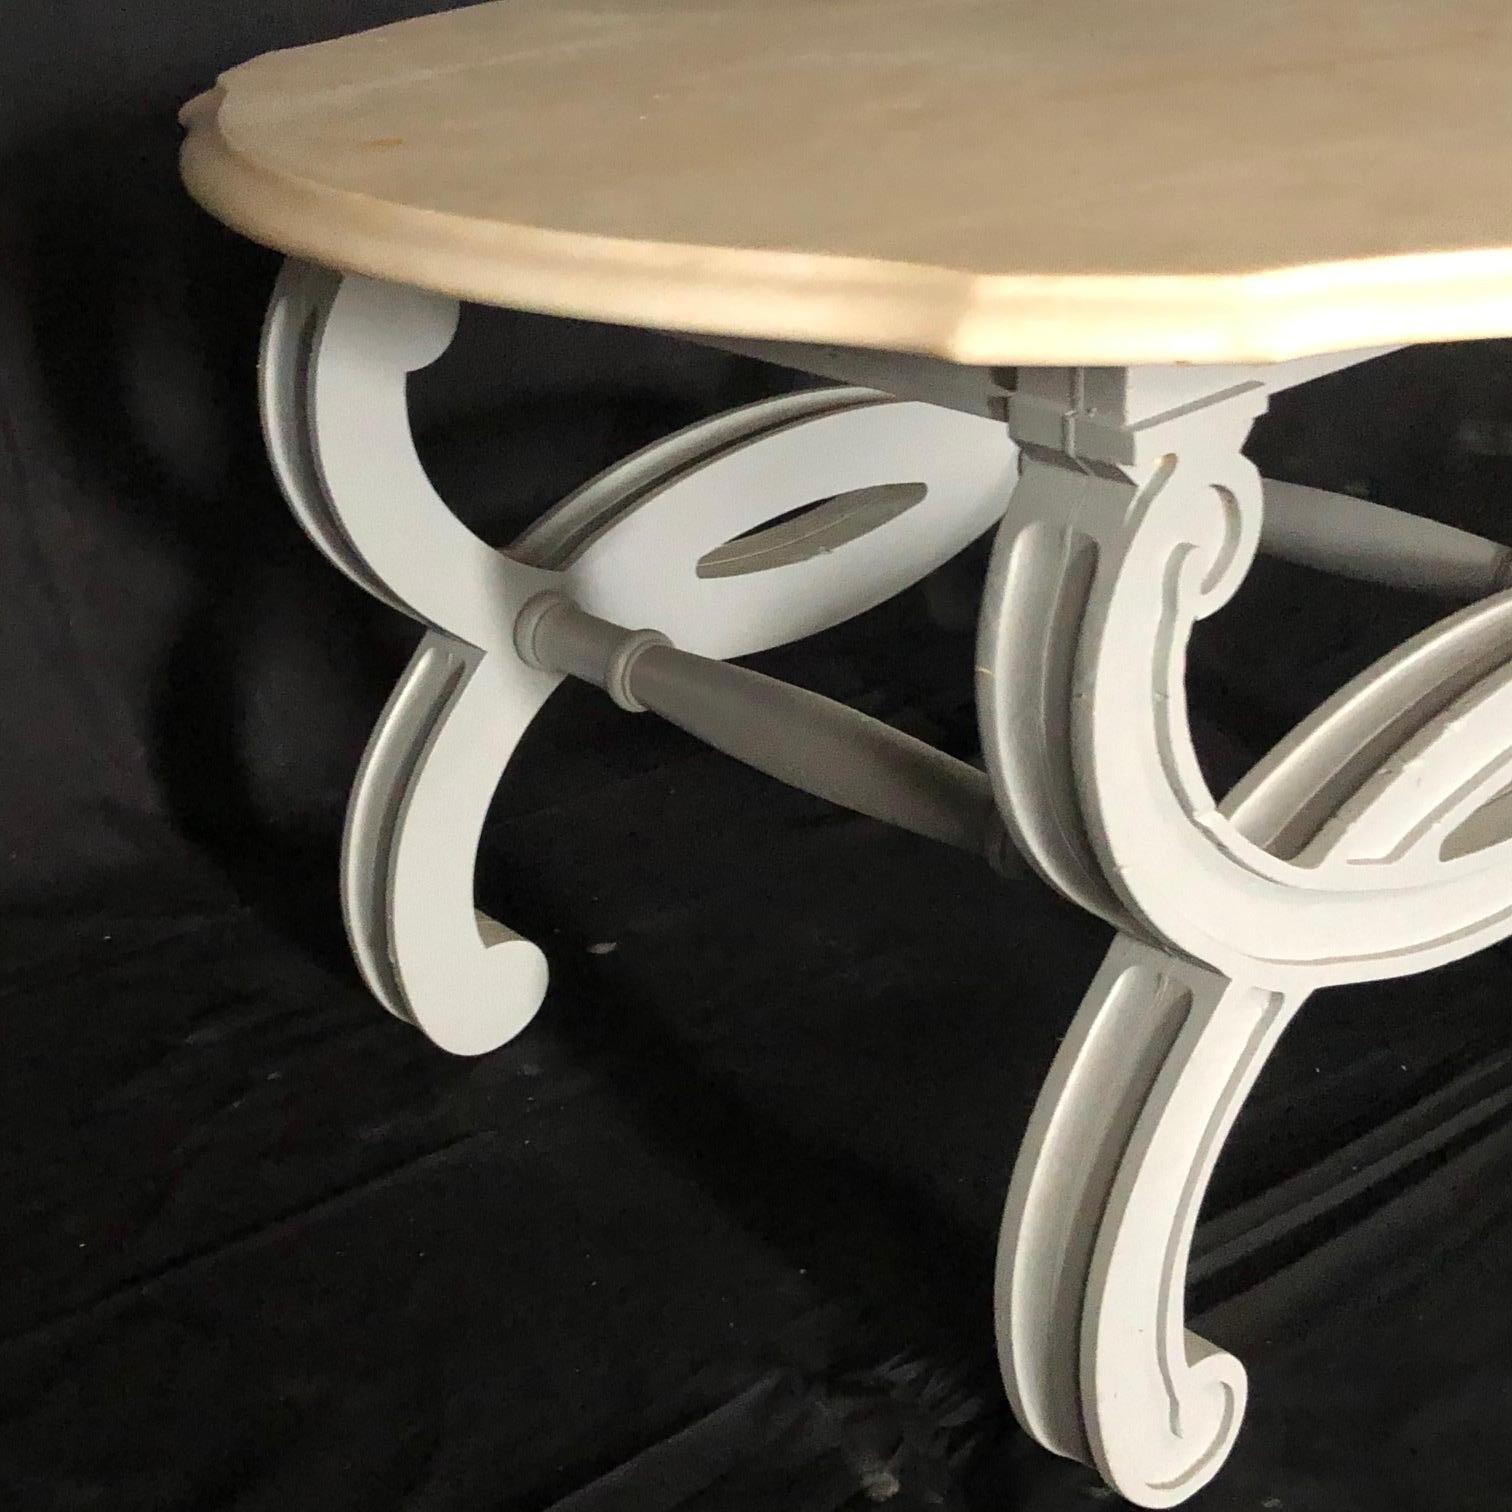 This decorative and versatile round side table or coffee table is handcrafted using a stunning Portuguese Carrara marble. This selective thick marble is in excellent condition and has natural veining in a stunning white/cream/ivory color. The